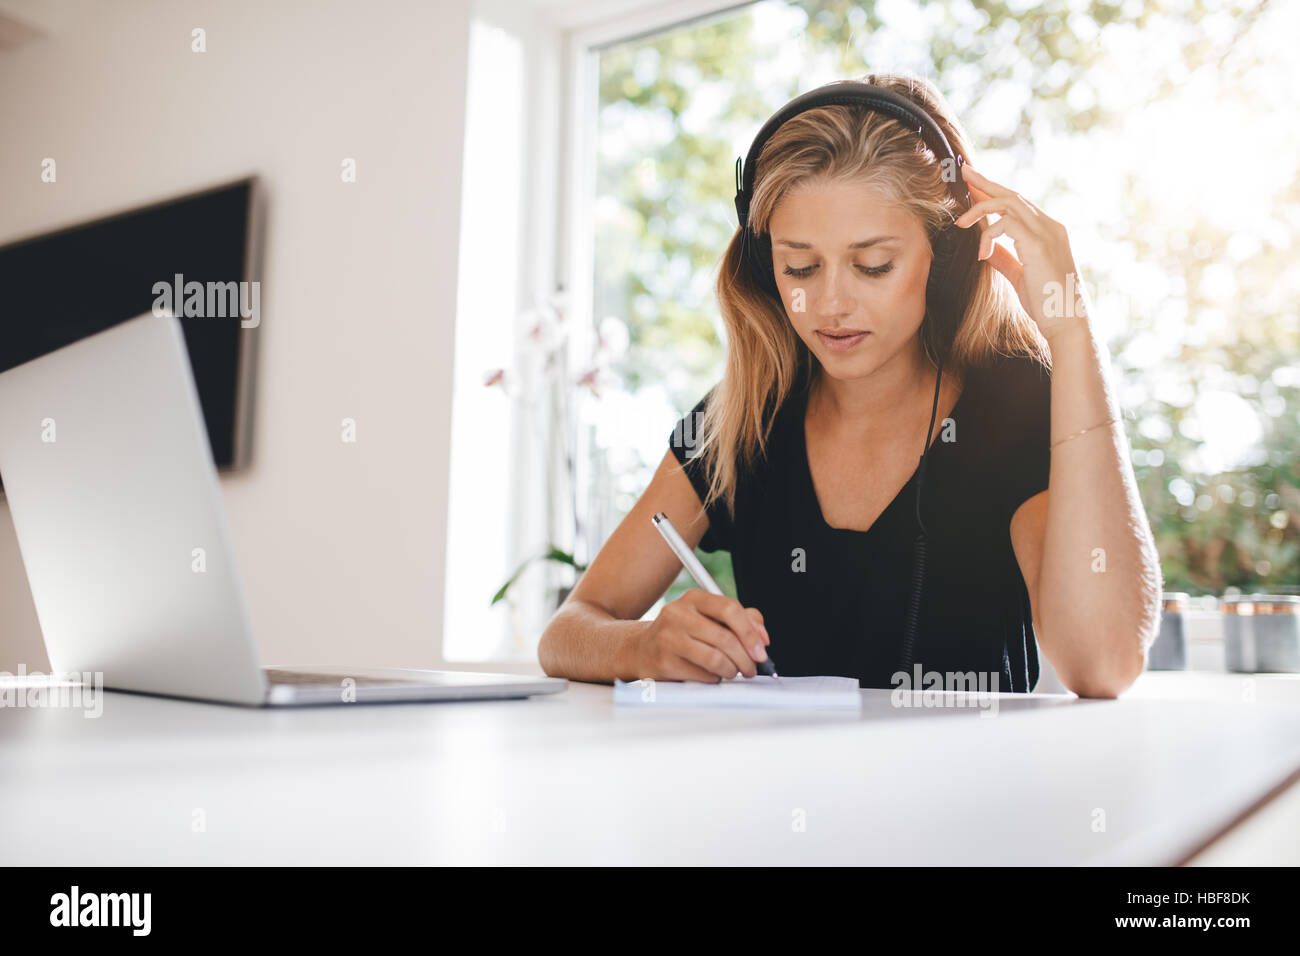 Indoor shot of woman studying in kitchen. Female wearing headphones and writing with laptop on table. Stock Photo